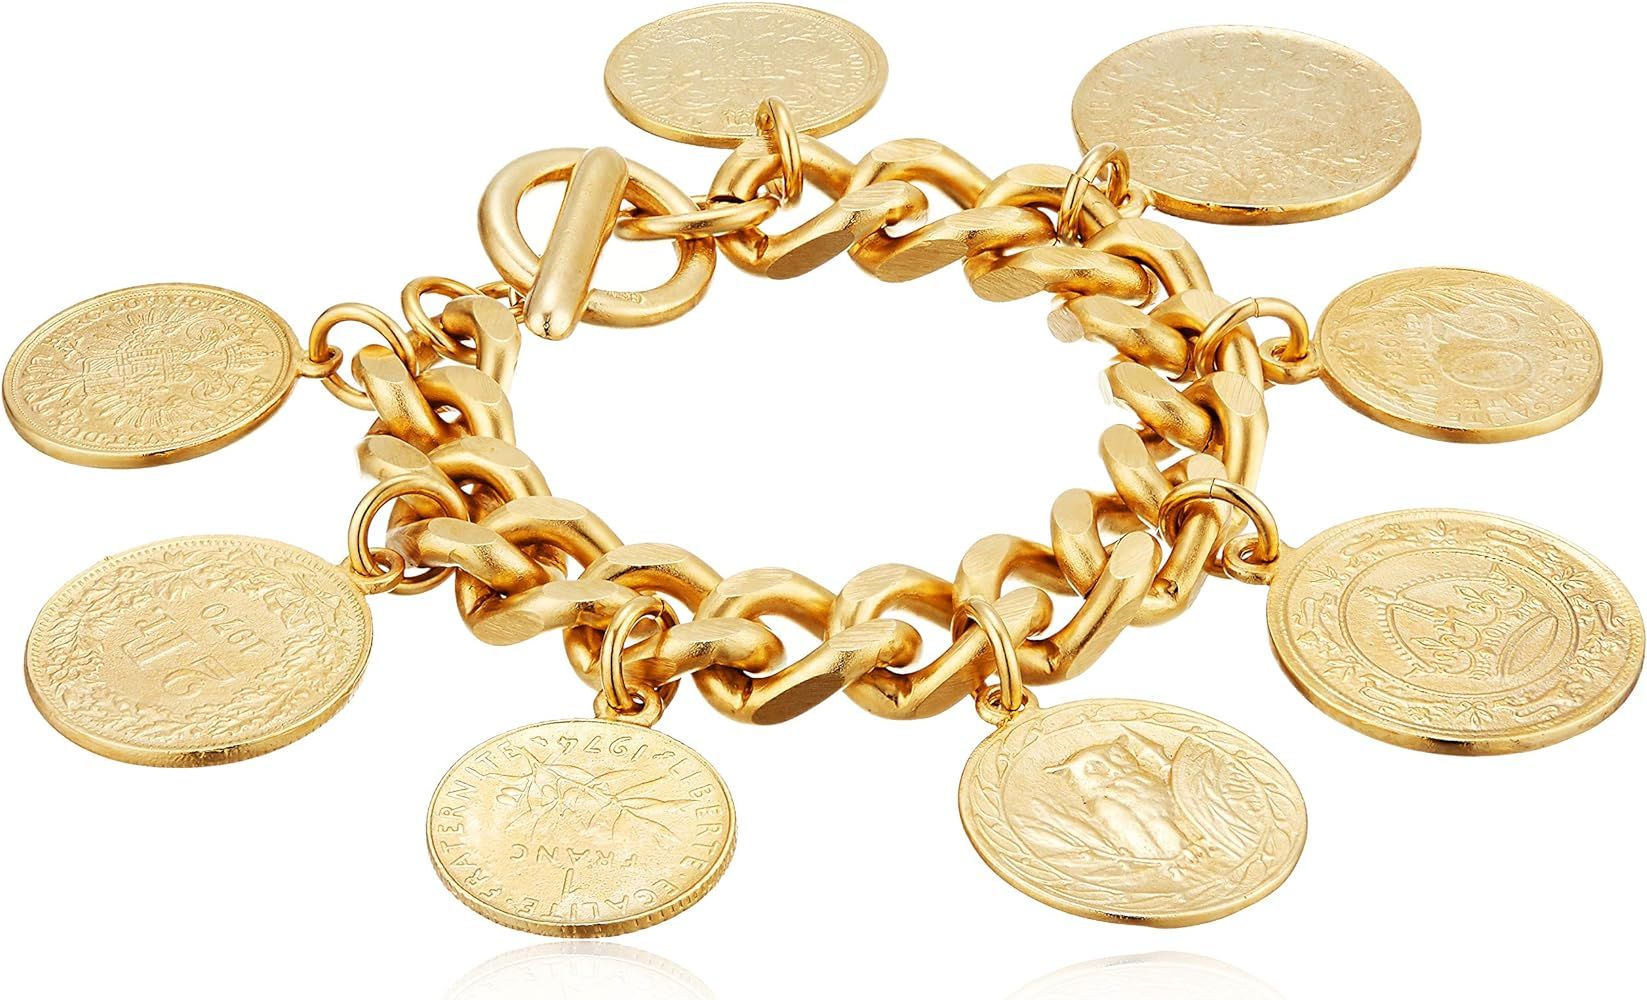 24k Gold Plated "Moroccan" Coin Vintage Bohemian Statement Jewelry Collection | Amazon (US)